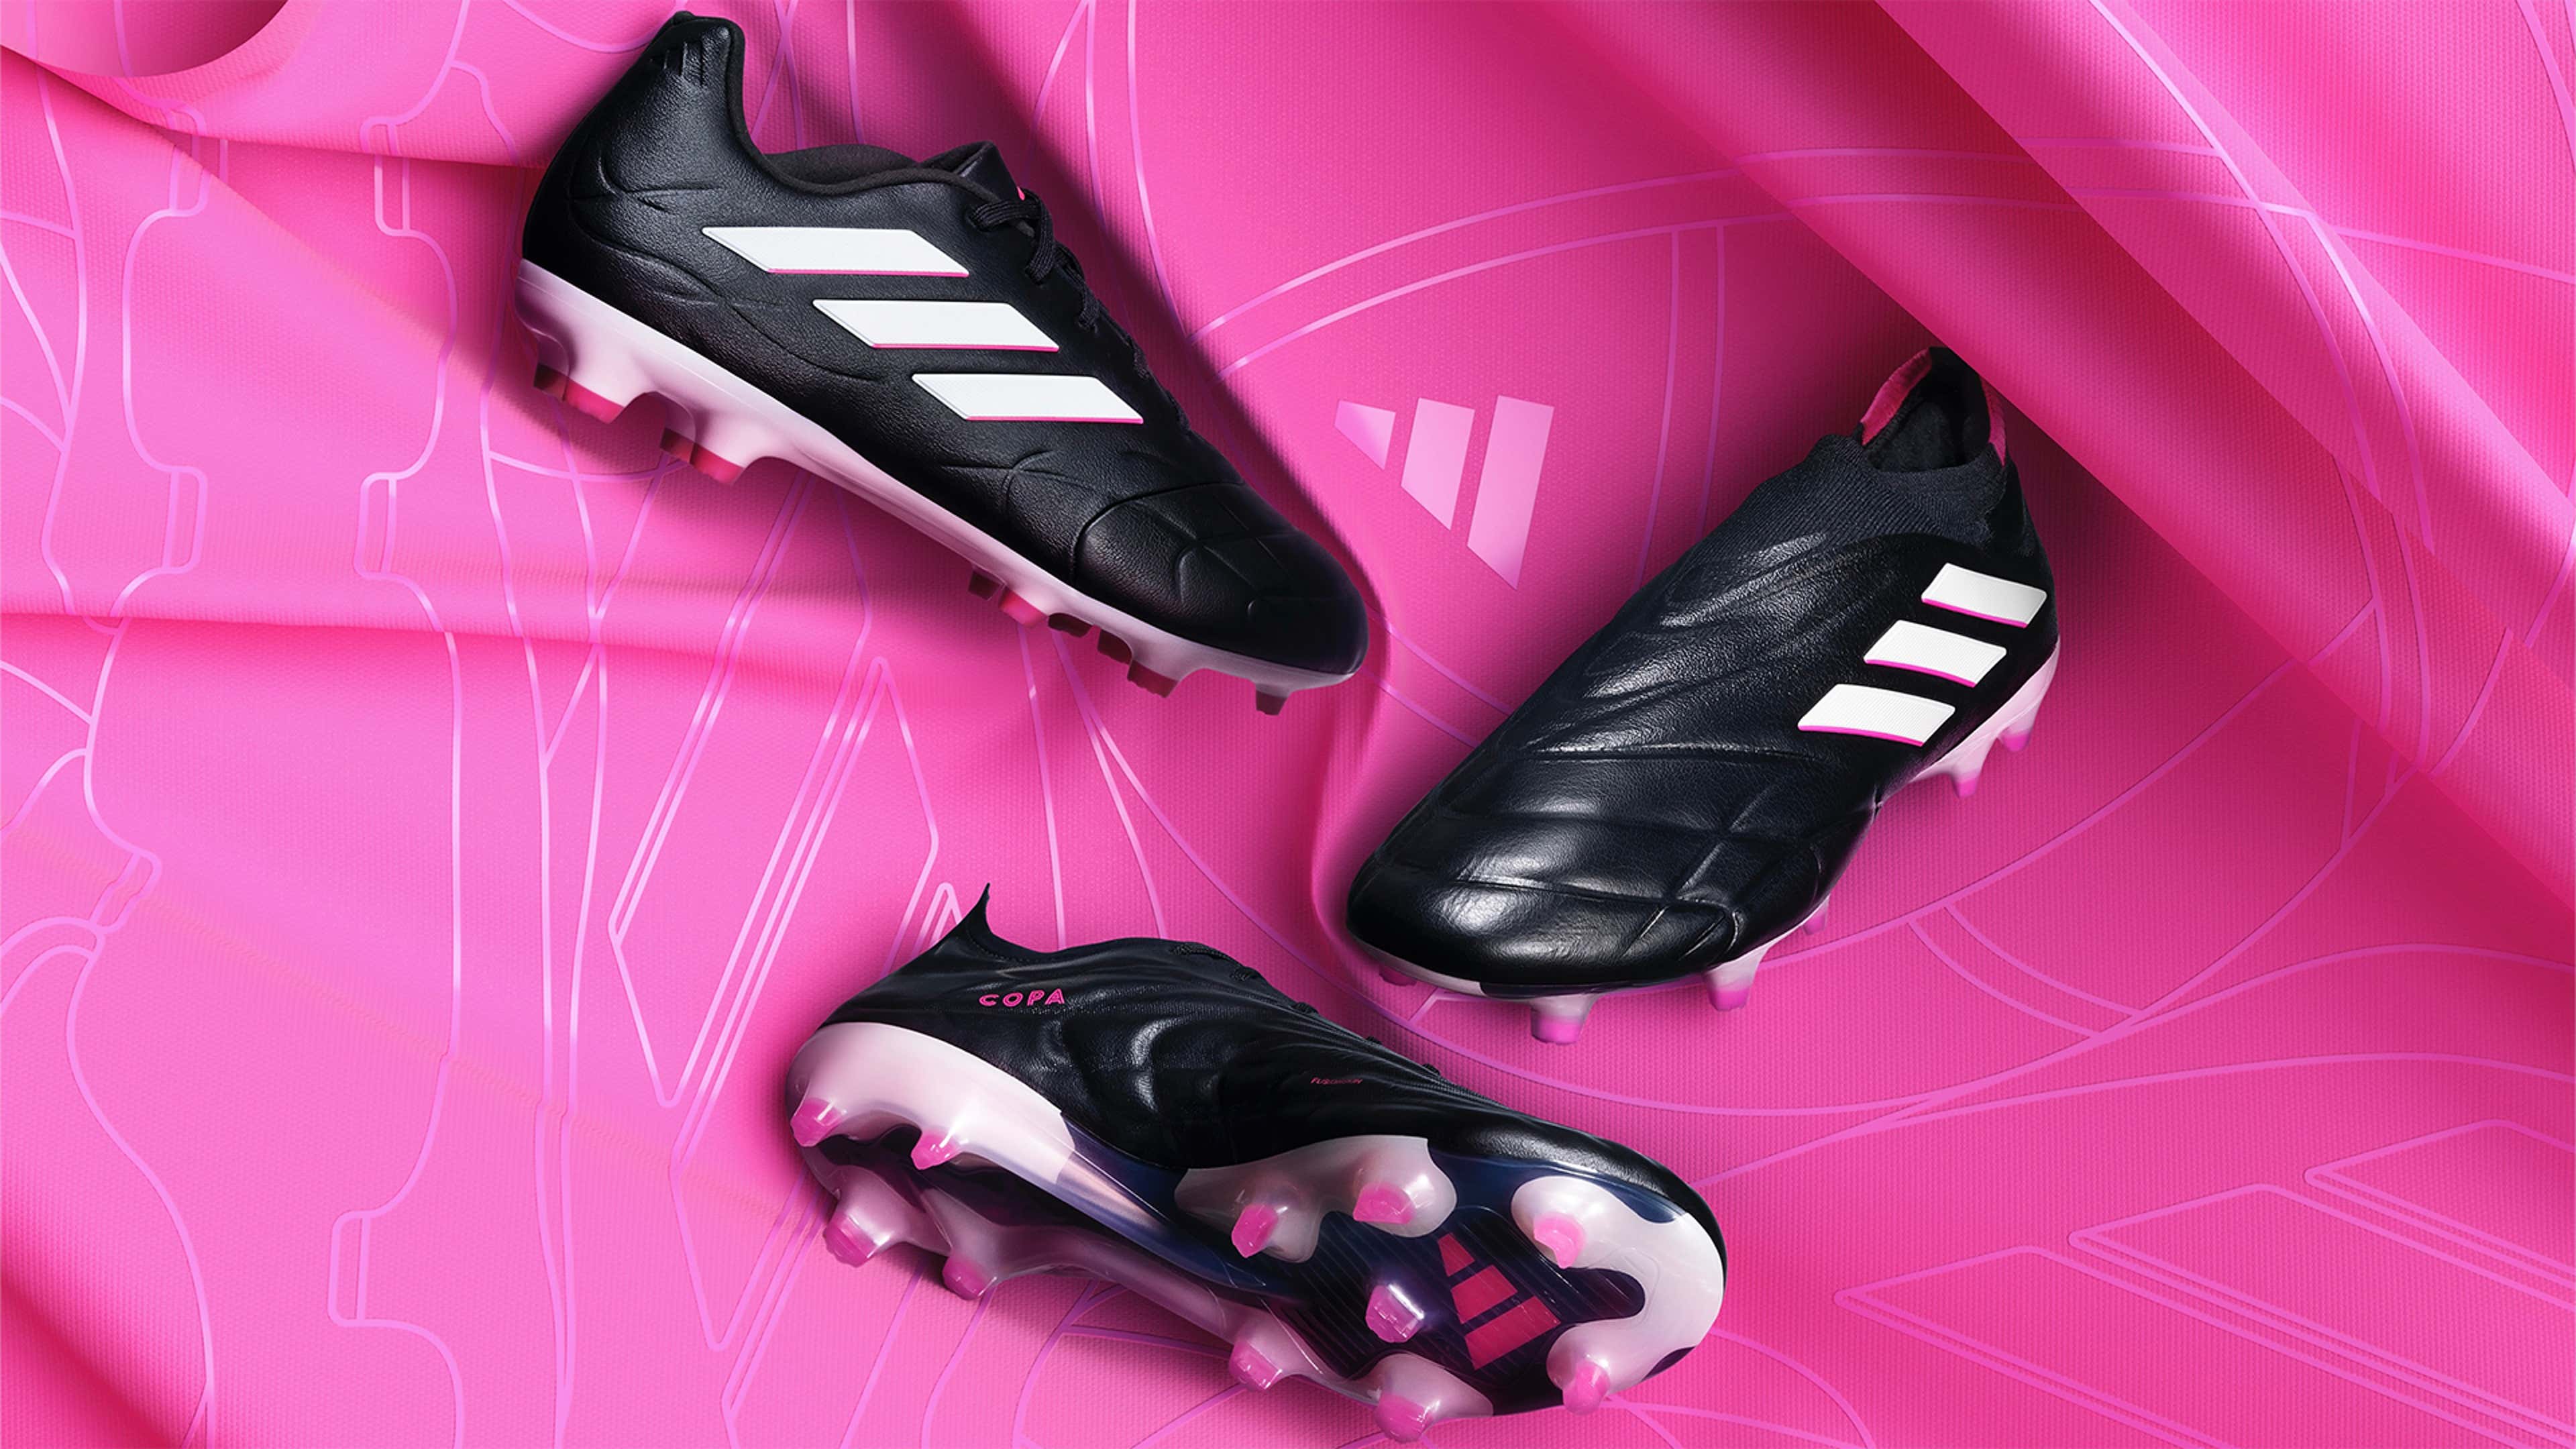 adidas expands the COPA line with new COPA | US